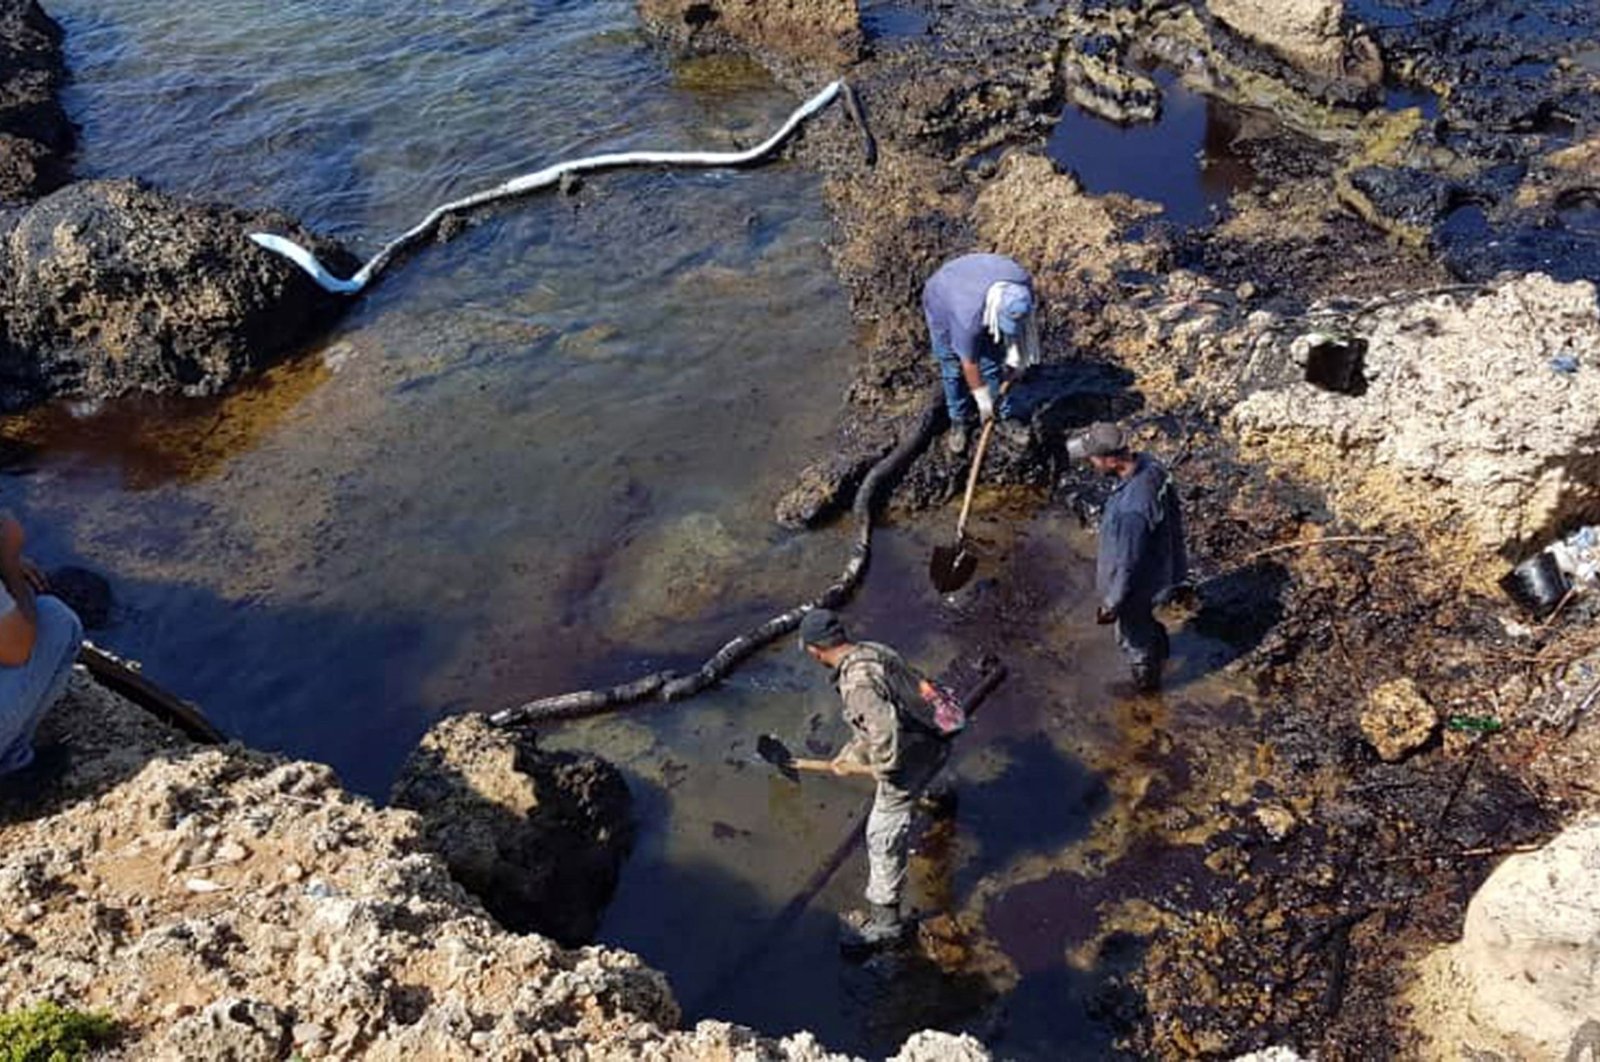 A handout picture released by the official Syrian Arab News Agency (SANA) shows people cleaning Syria's Mediterranean coast following an oil leak from the Baniyas power plant, Aug. 31, 2021. (AFP Photo)